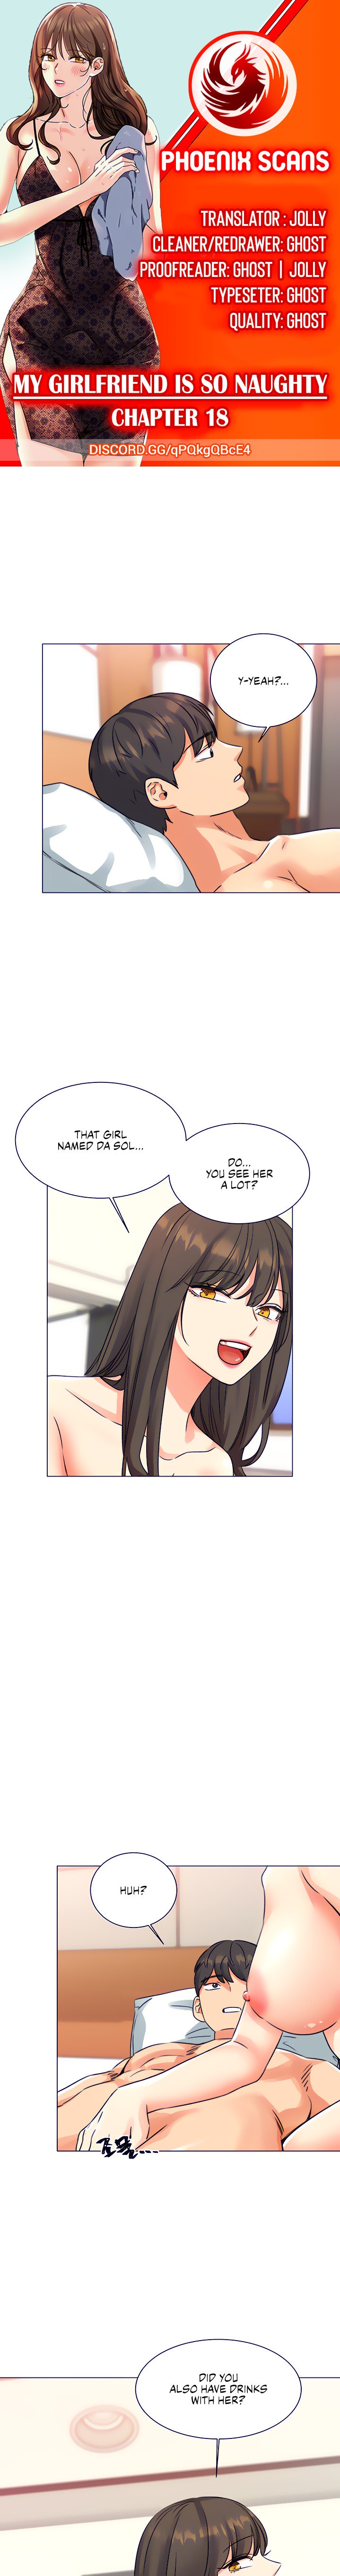 My girlfriend is so naughty Chapter 18 - Page 1